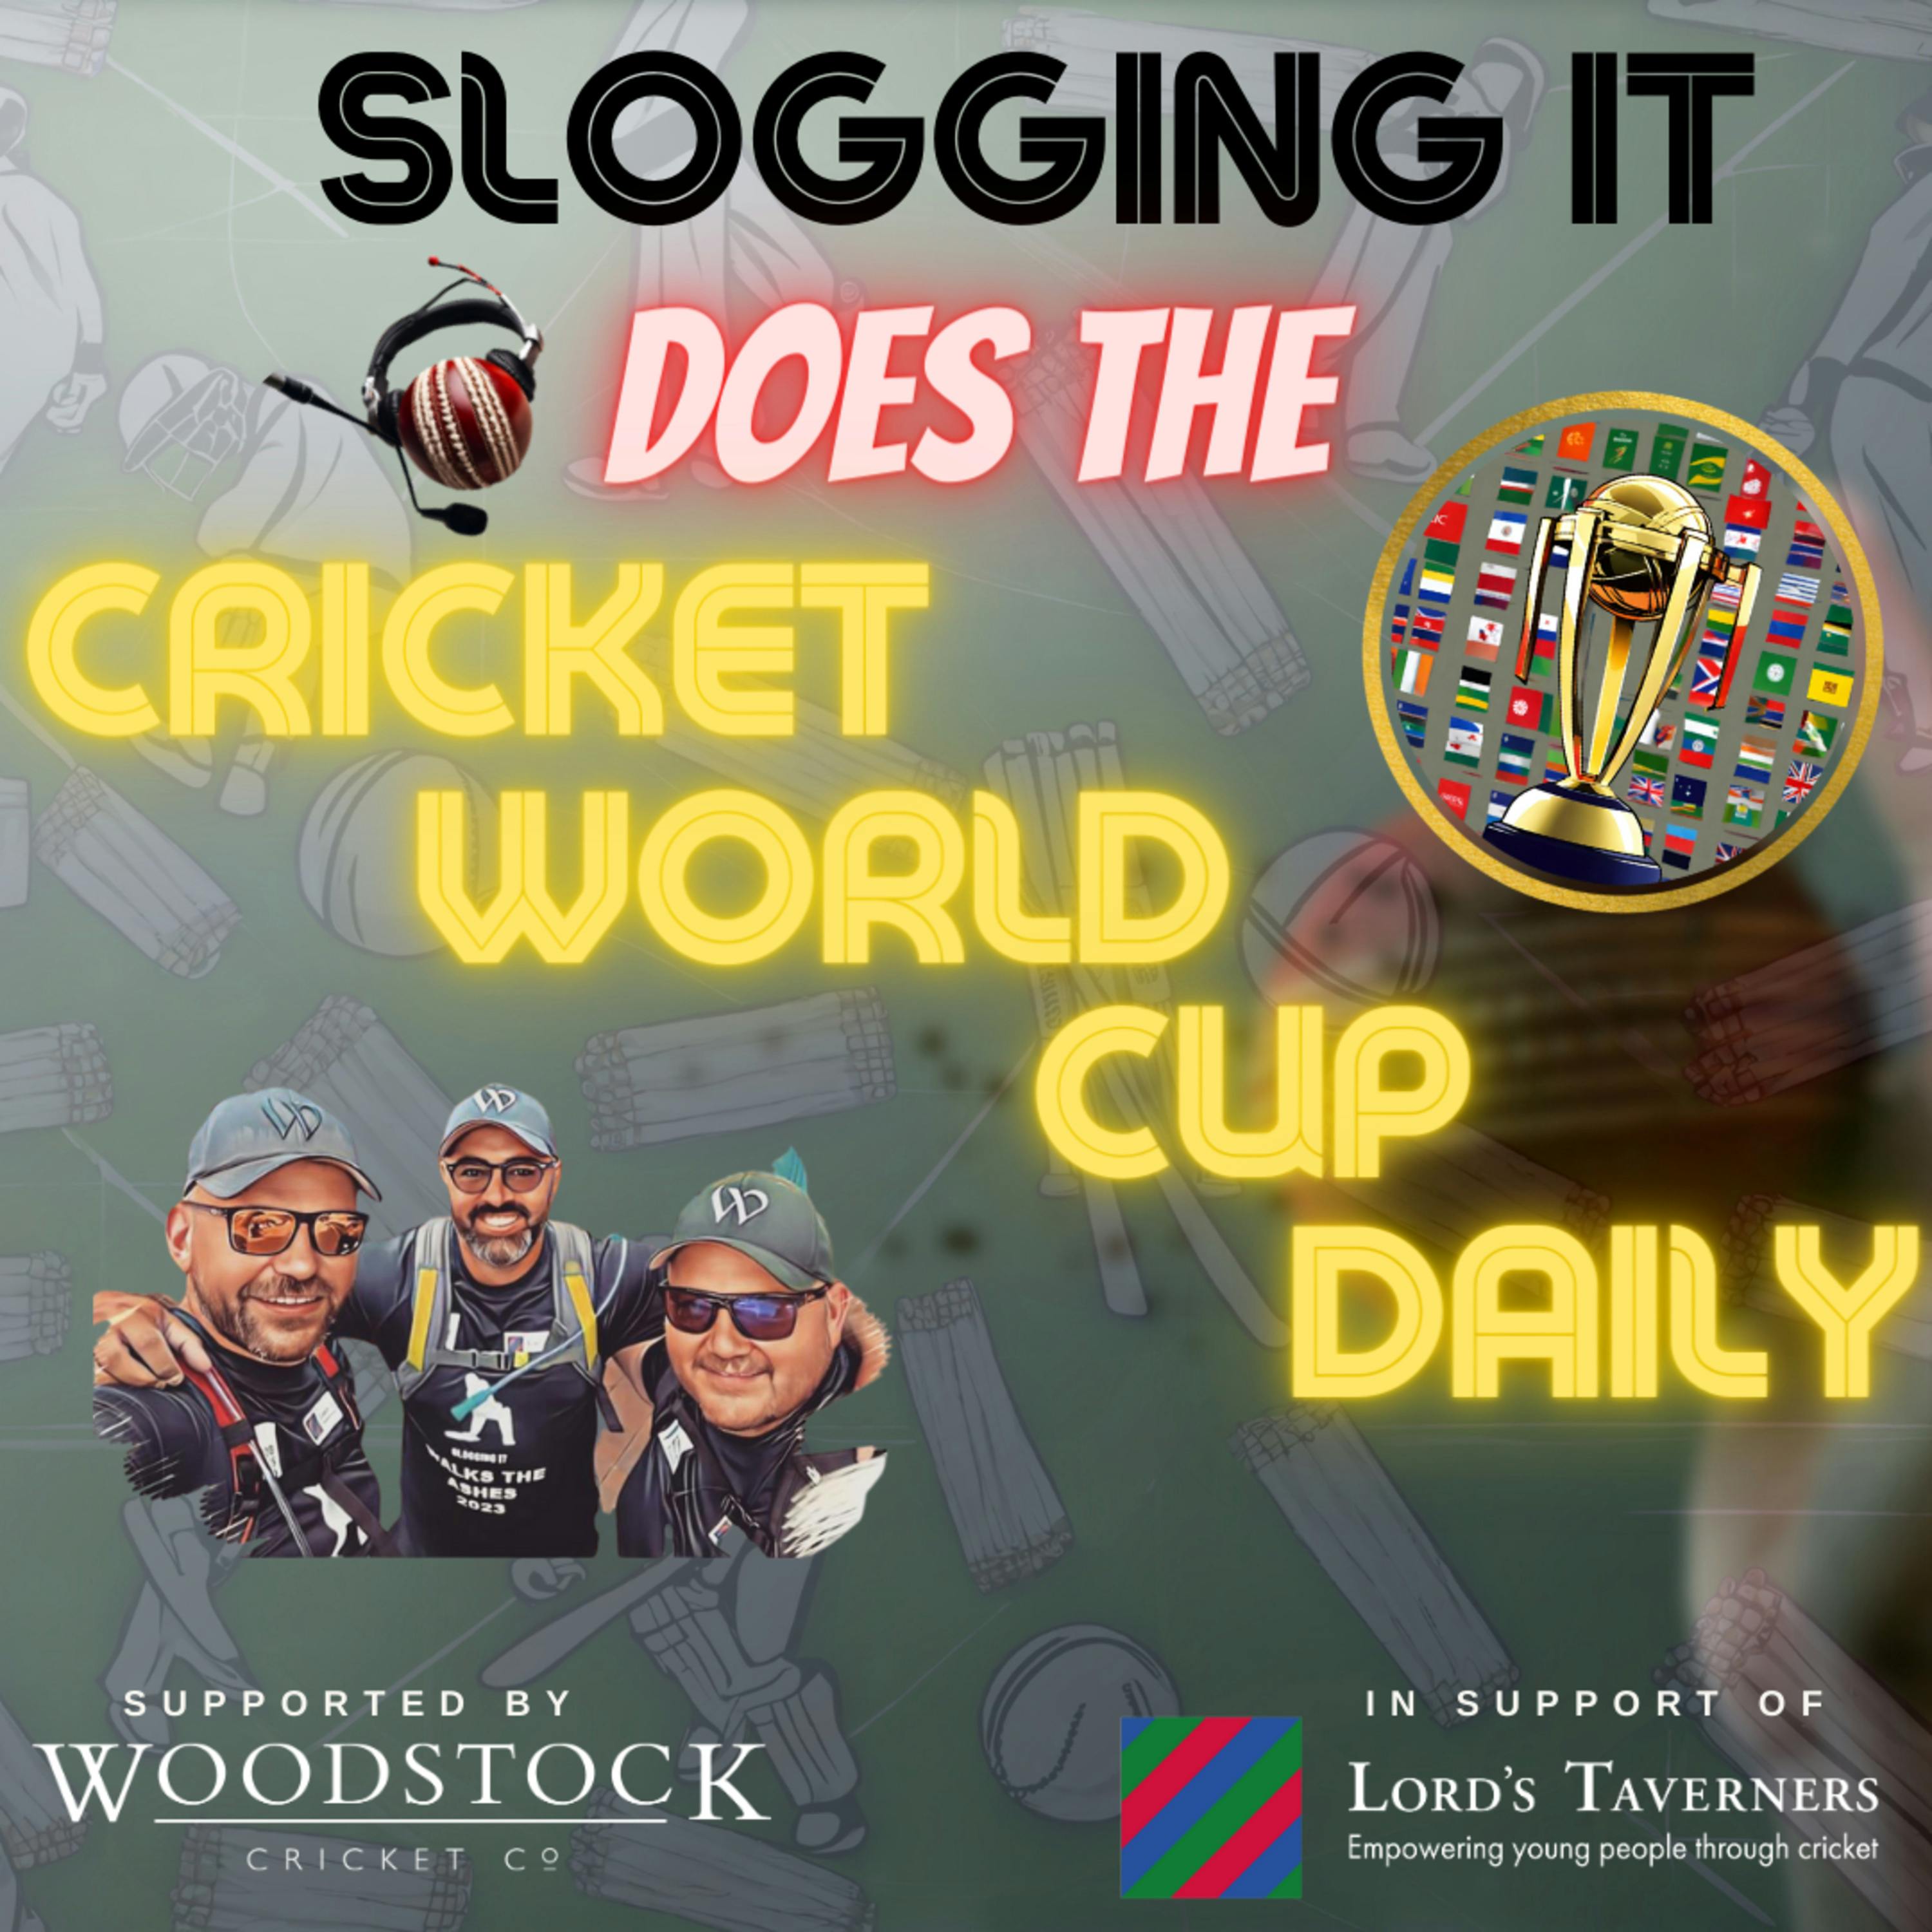 CWCD Day 1 - (Sorry Tim) Predictions, Analysis, and a Shaky Start to the Cricket World Cup